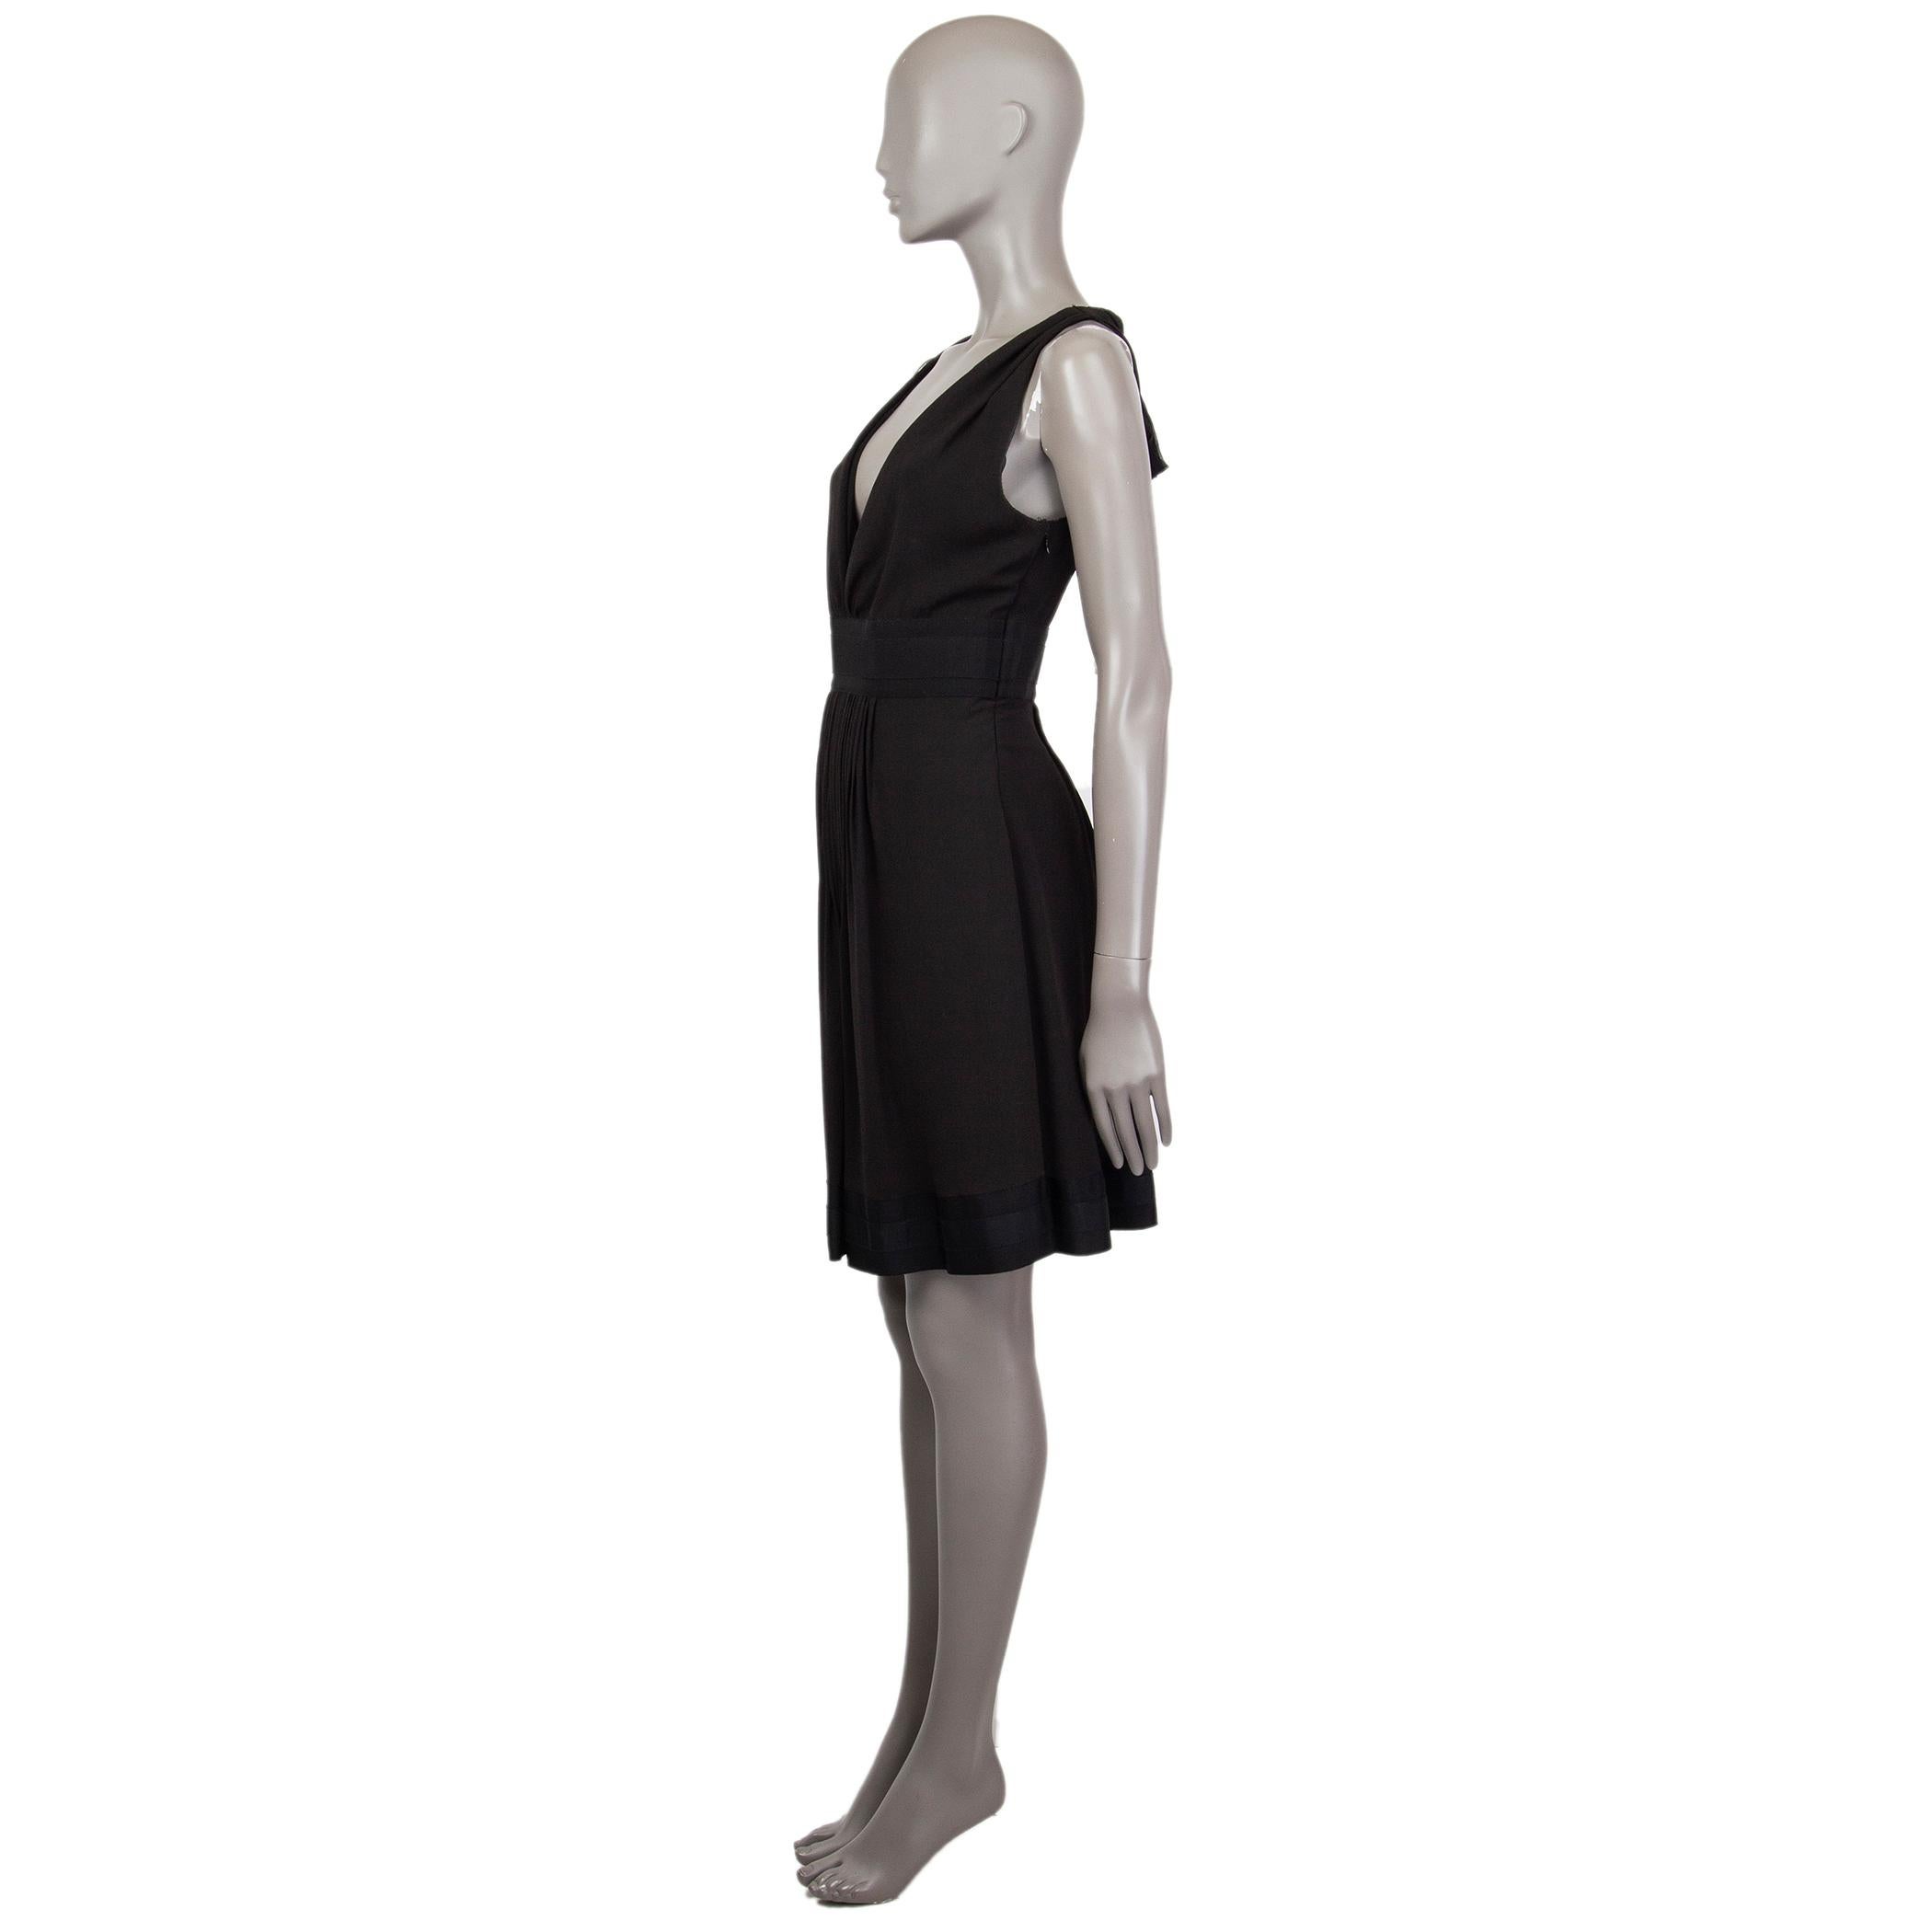 Prada gathered-front black dress in black triacetate (60%) and polyester (40%) with a v-neck. Has trimming around the waist and bottom in black silk (100%). Closes on the side with concealed zipper and ties around the back of the neck. Unlined. Has